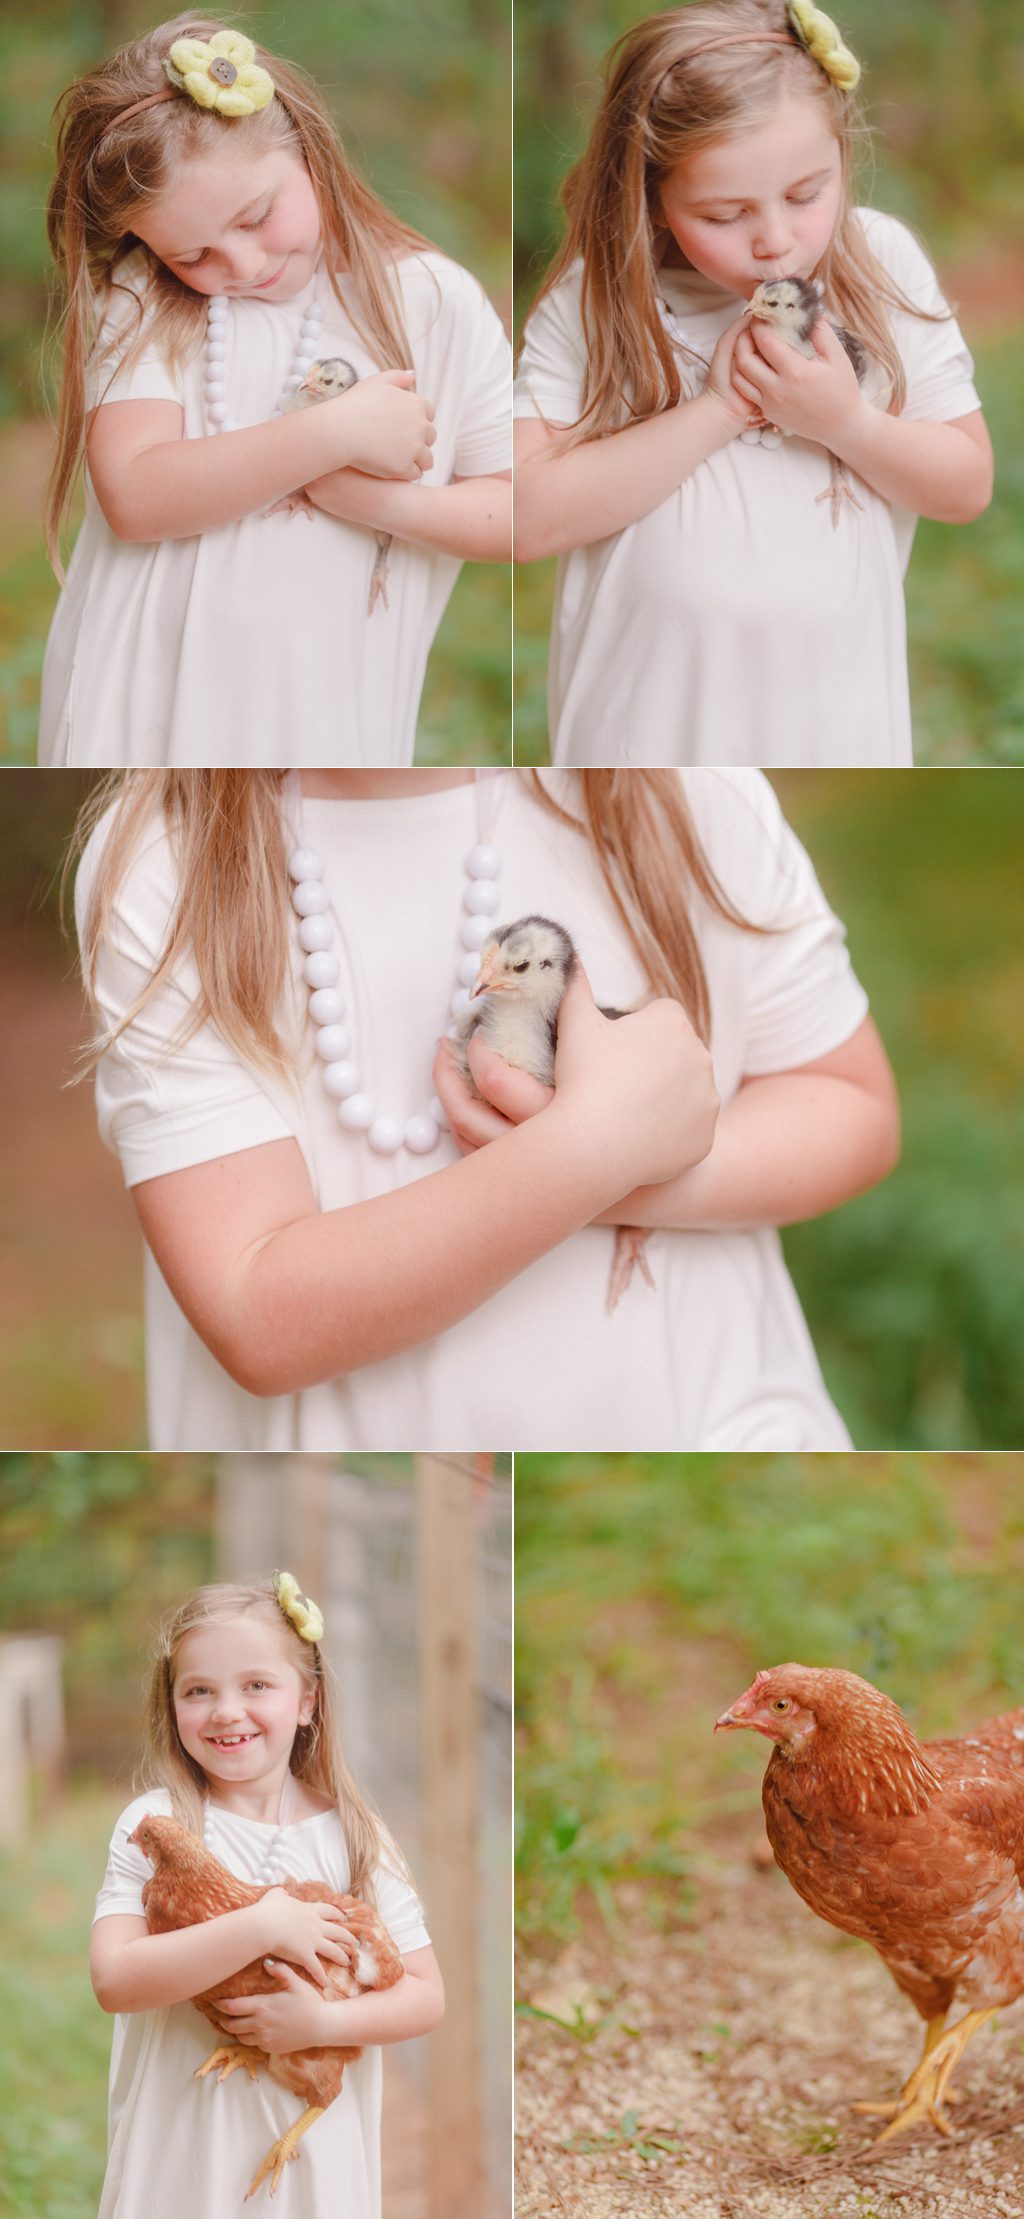 Portraits of a little girl with her chickens in Watkinsville, GA.